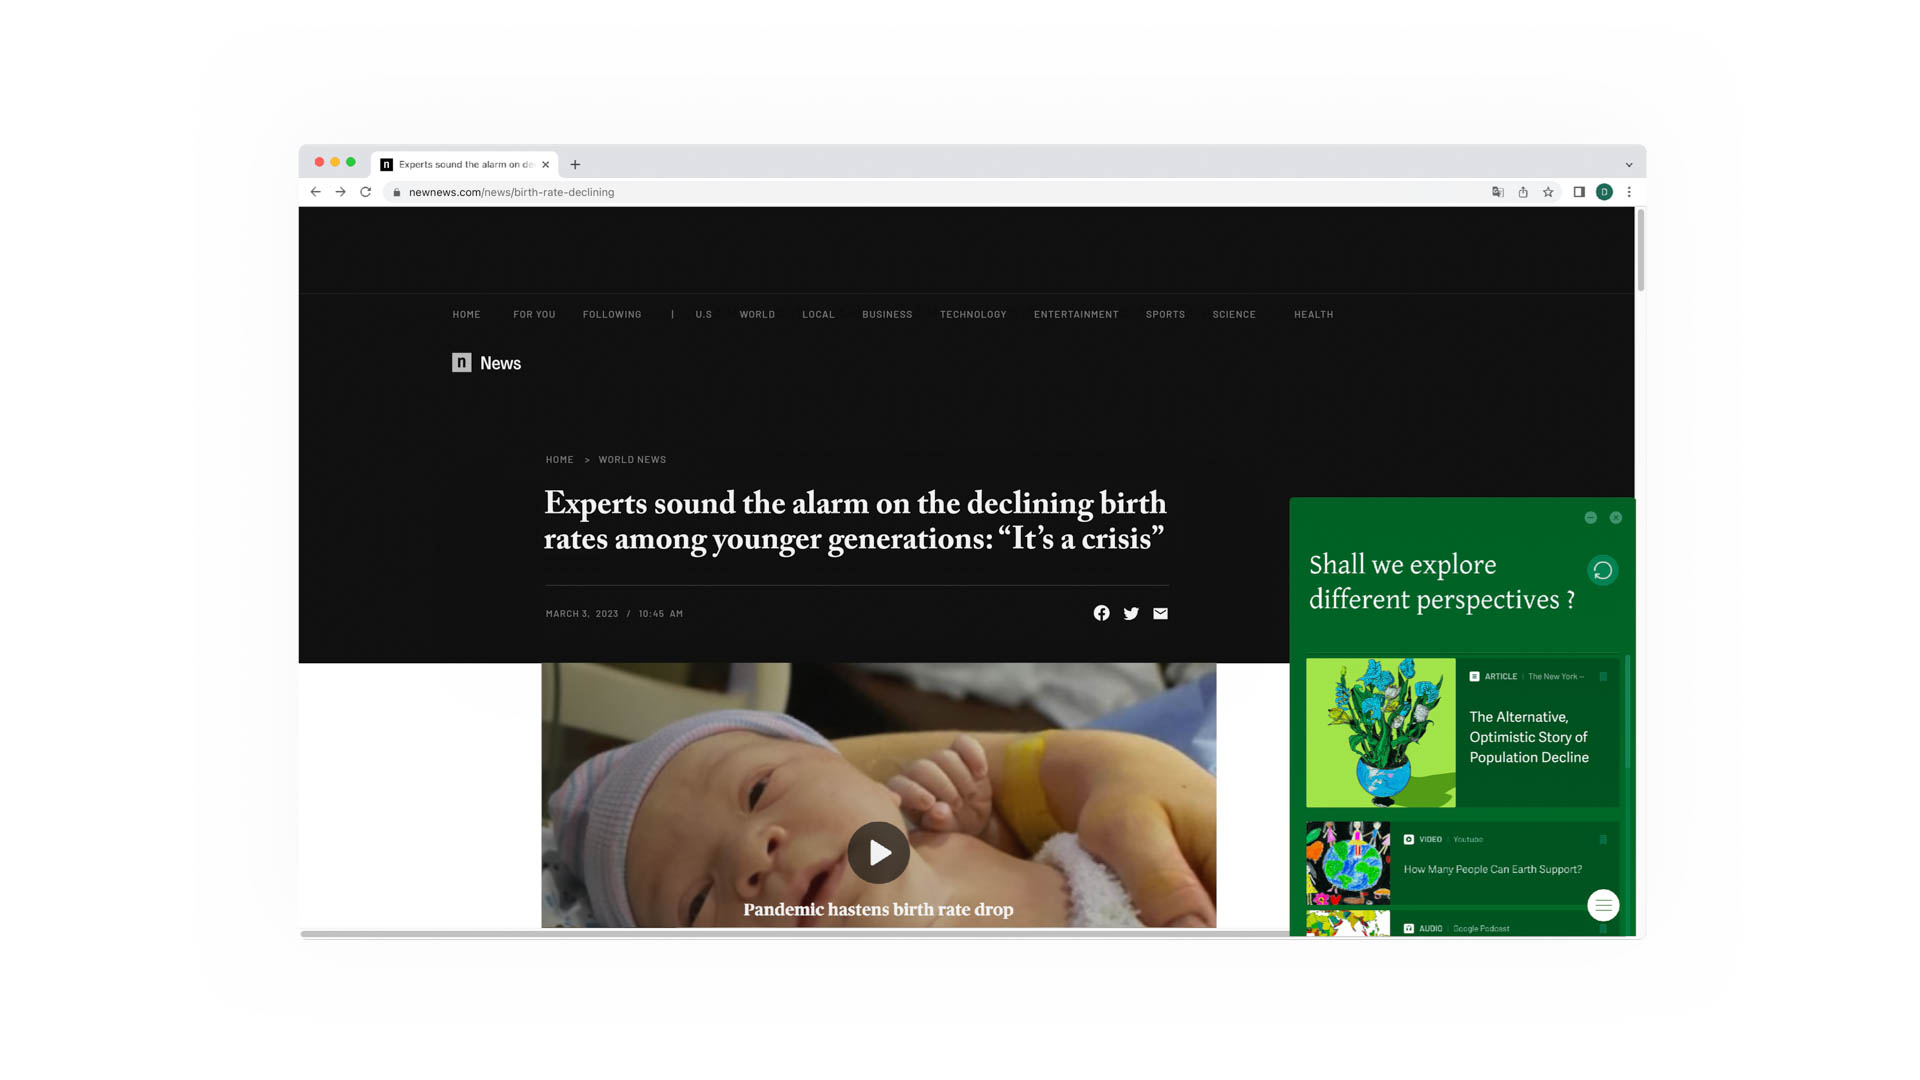 webpage showing a baby